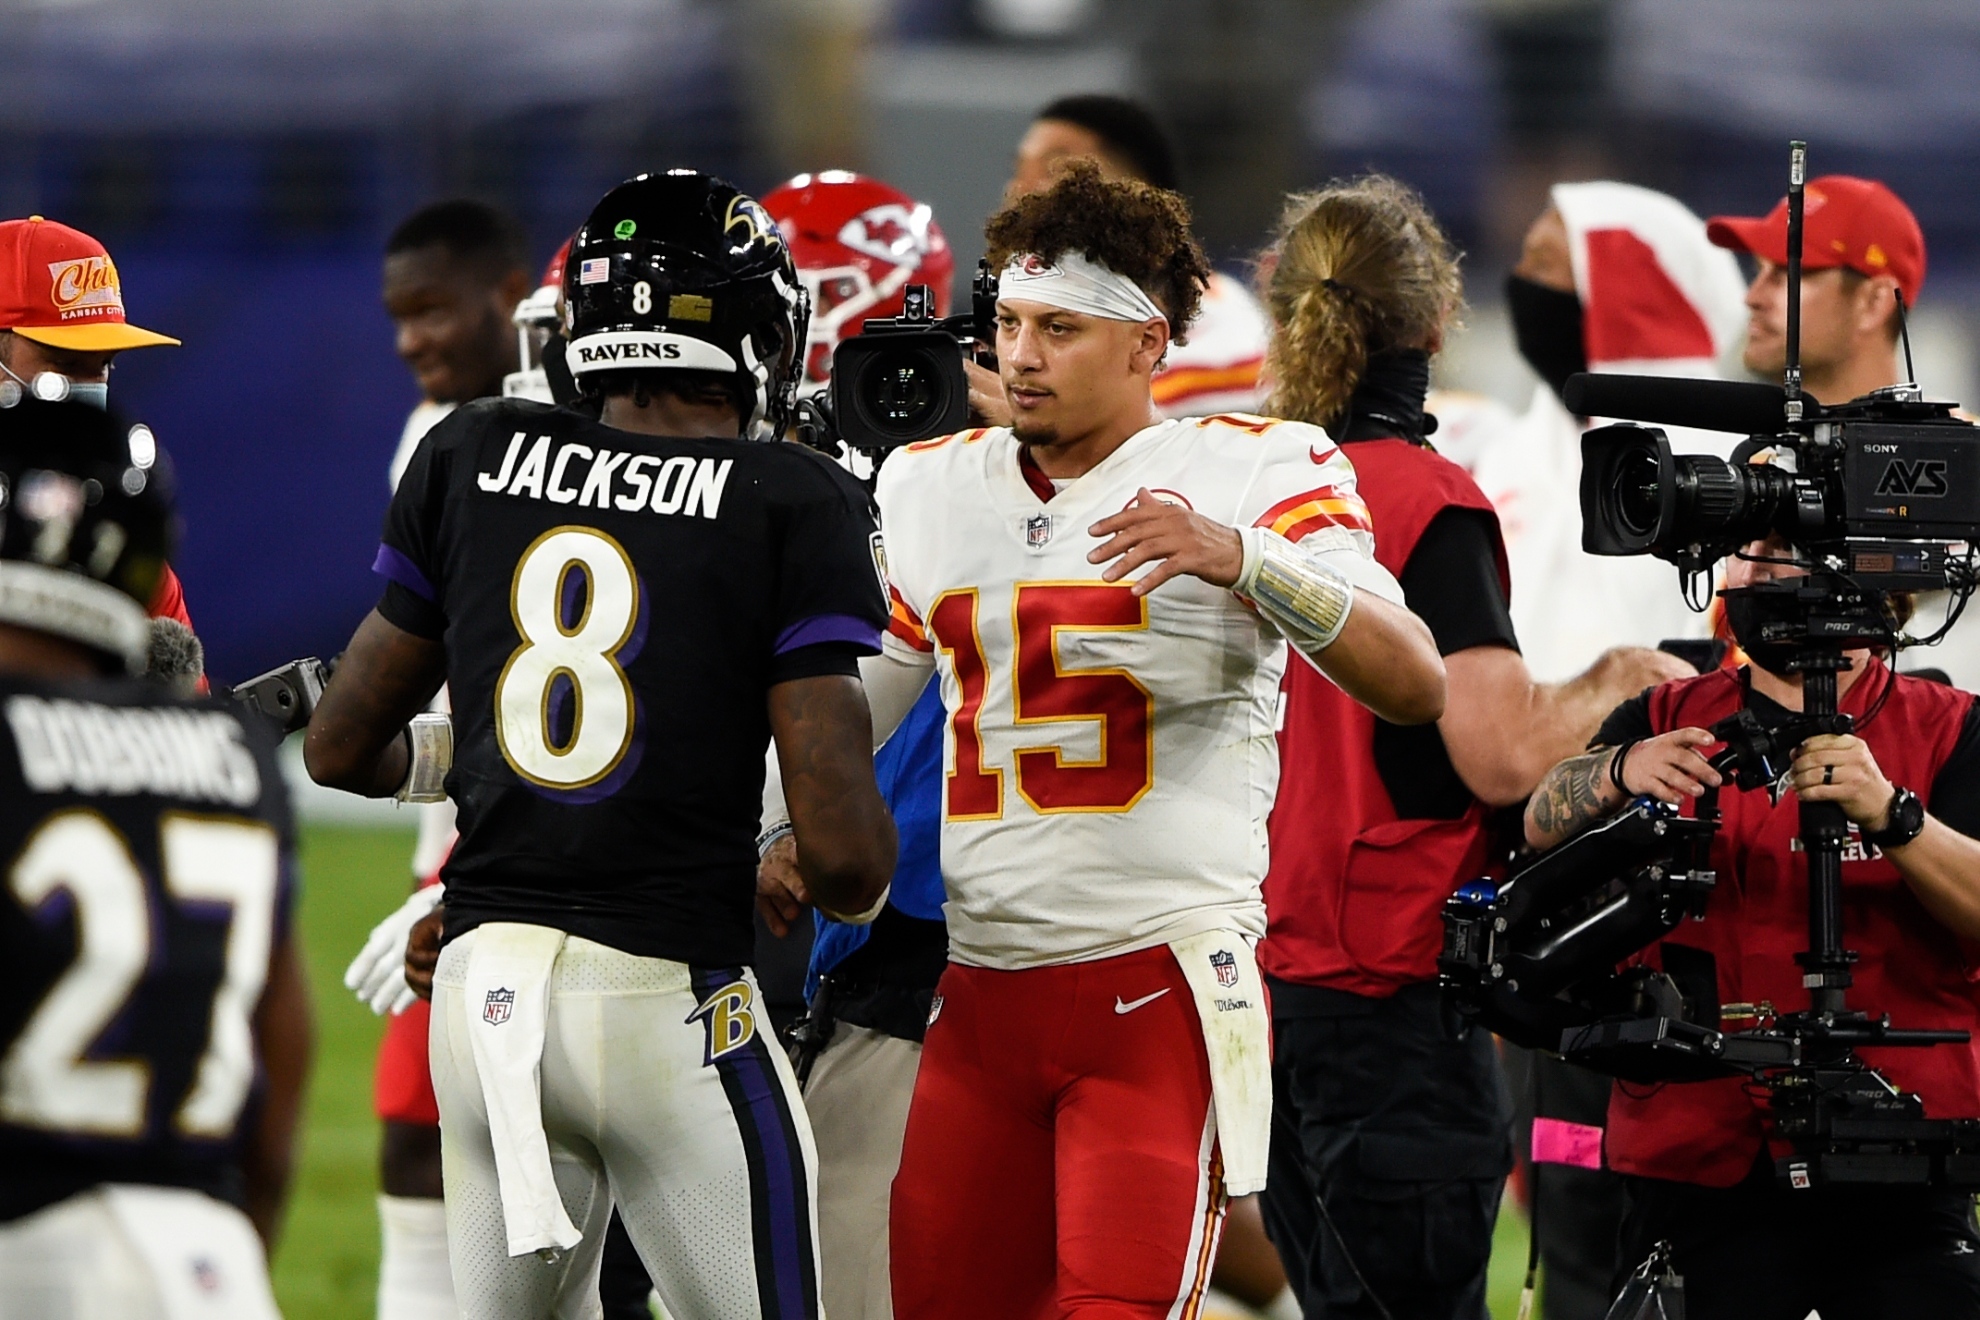 The Kansas City Chiefs' star already knows he is going to war against the Ravens QB Patrick Mahomes reveals what he expects from another clash against Lamar Jackson